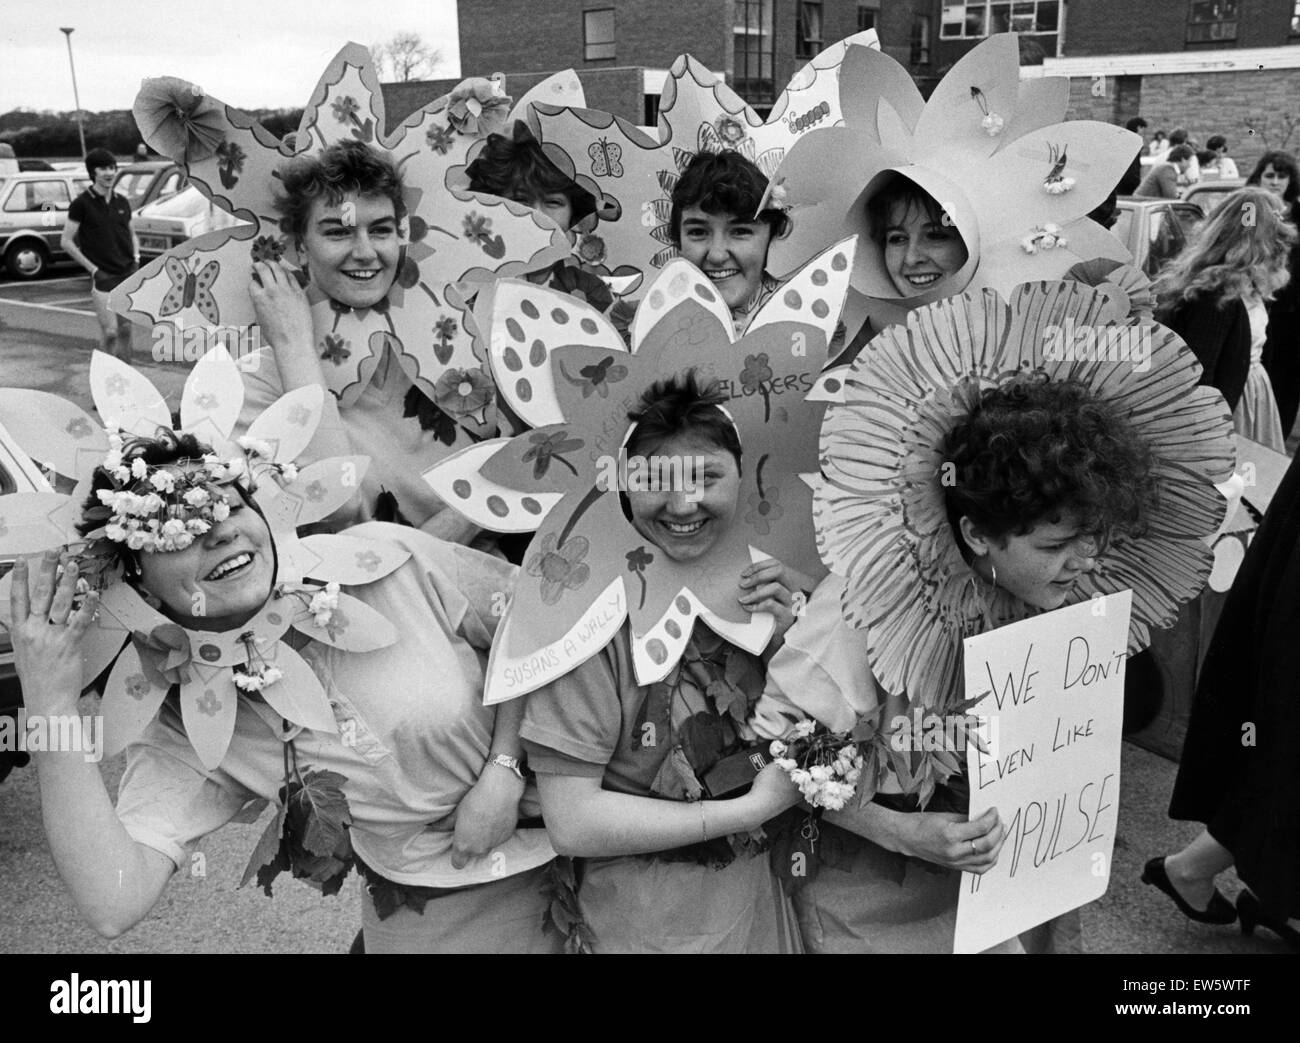 Students from St Mary's Sixth Form College, Middlesbrough, take part in fun run, 15th May 1986. Stock Photo